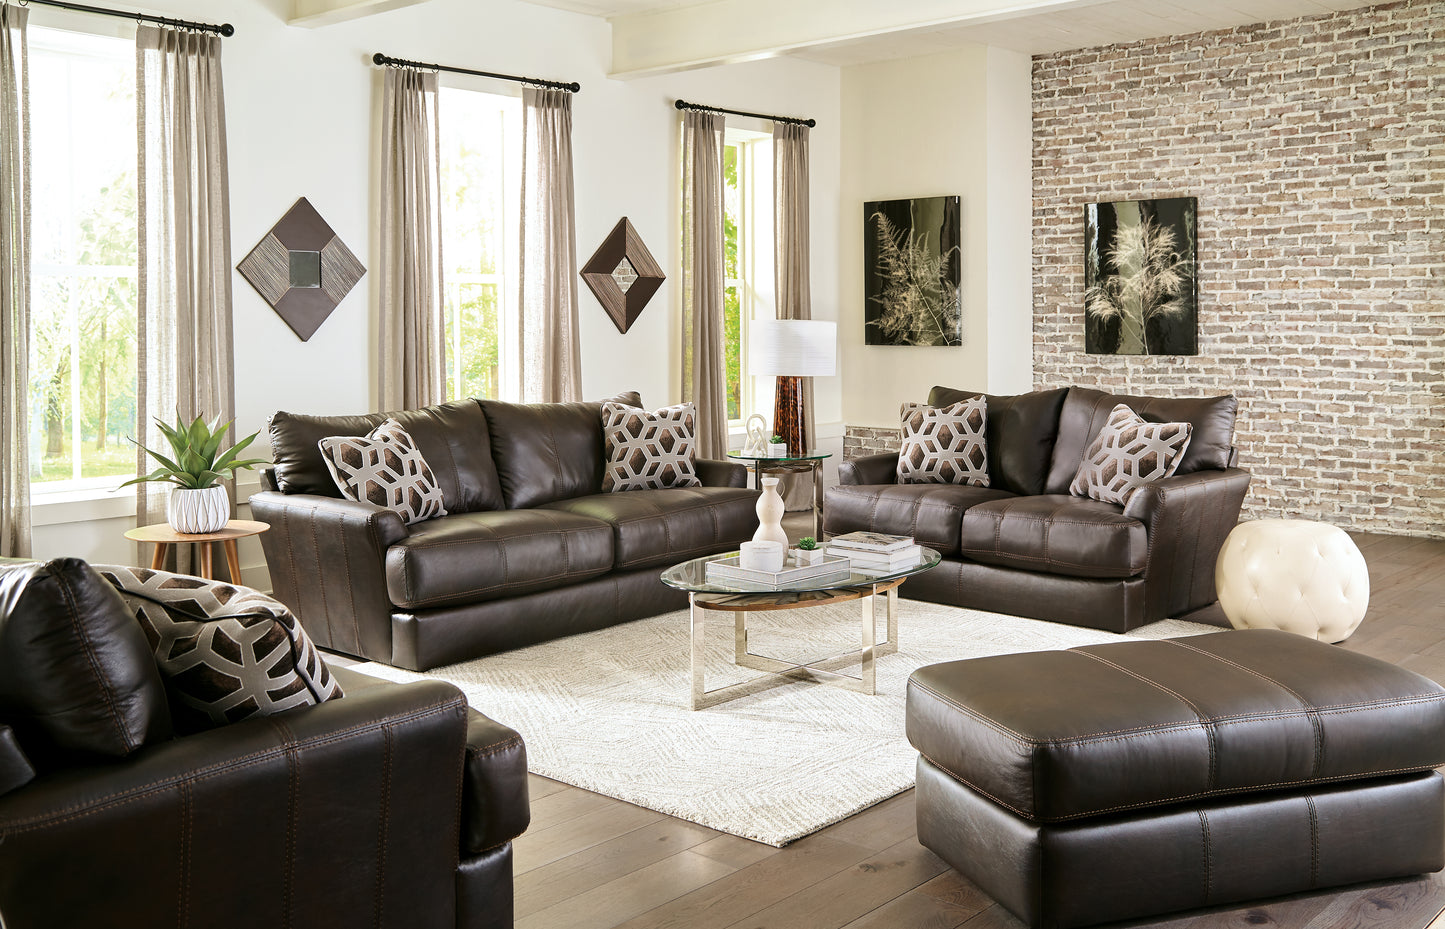 Patro Sofa, Loveseat, Chair & Ottoman Available in Chocolate & Putty